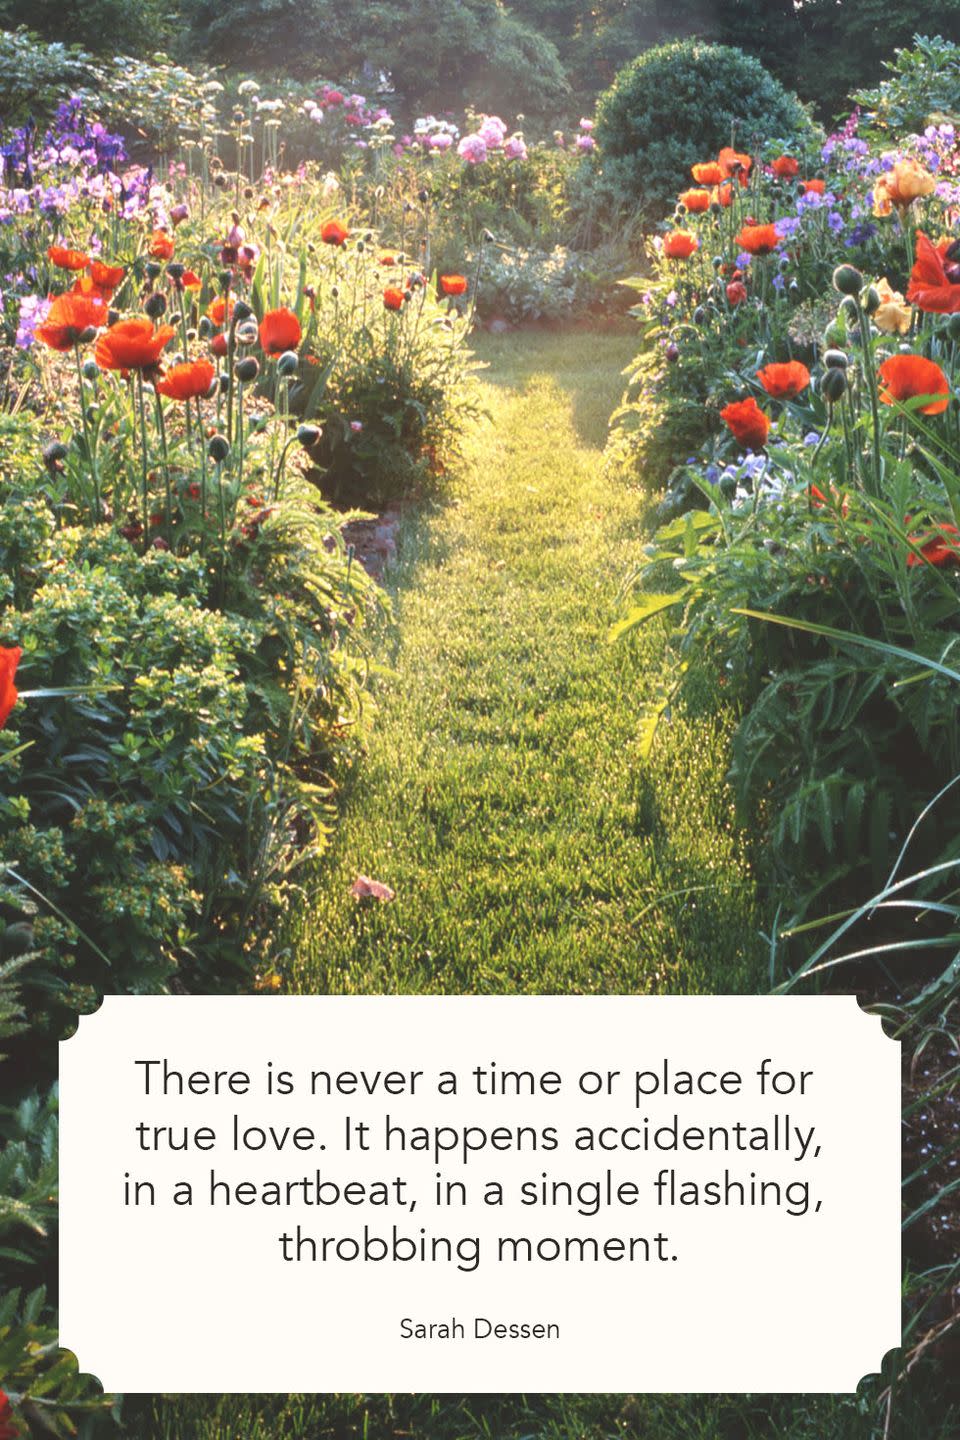 <p>"There is never a time or place for true love. It happens accidentally, in a heartbeat, in a single flashing, throbbing moment."</p>